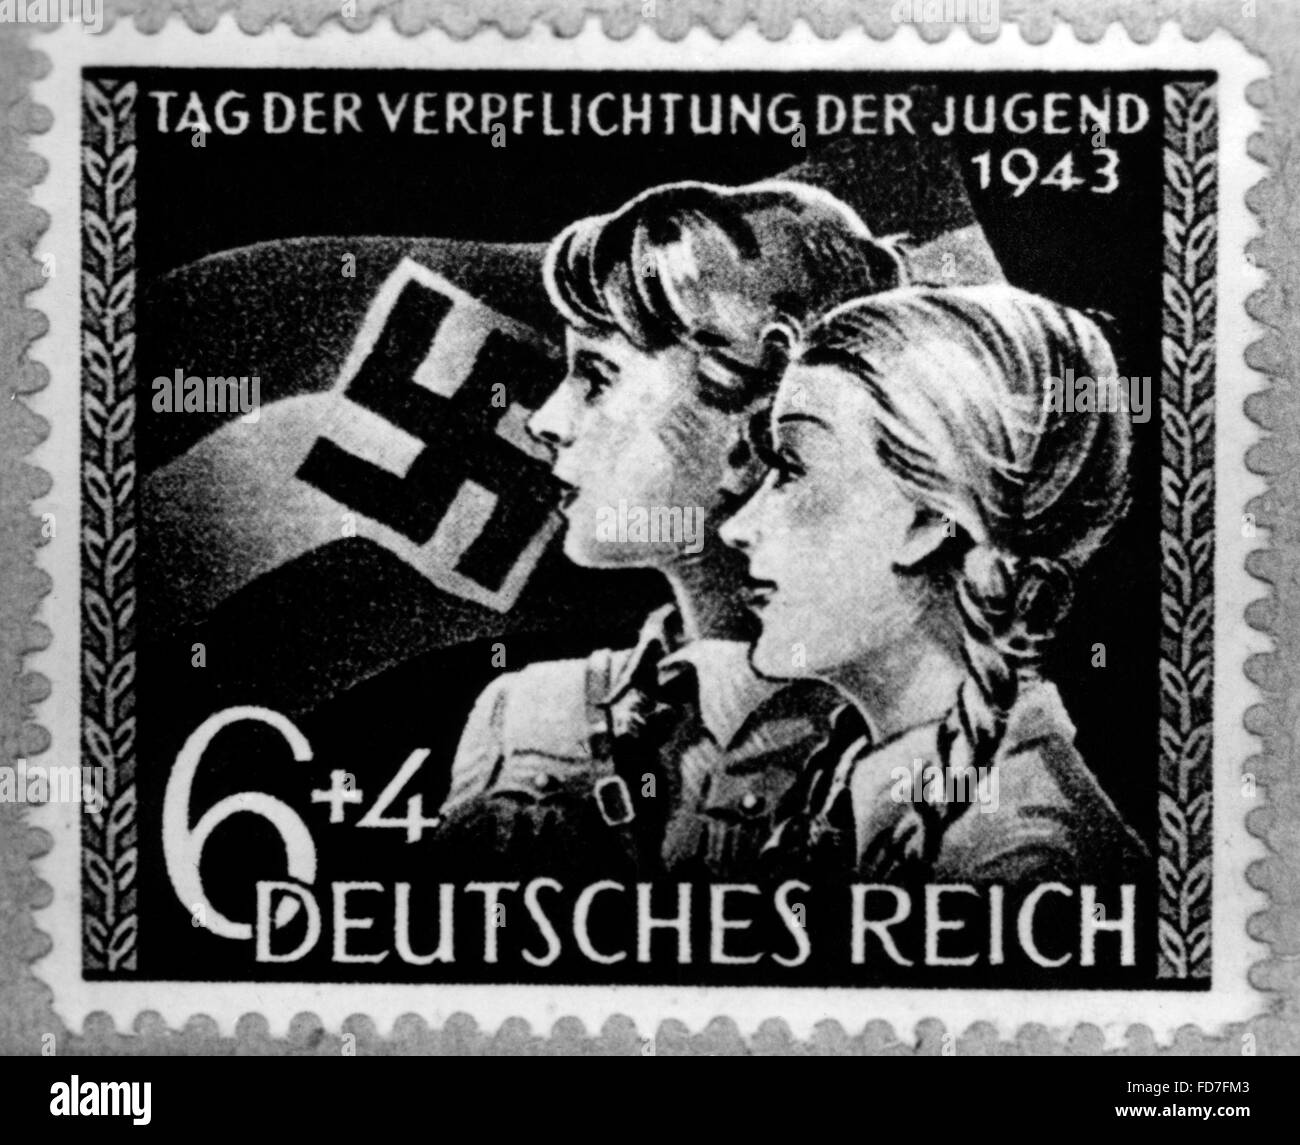 Stamp of the 'Verpflichtung der Jugend' (Commitment of the Youth) of the Deutsche Reichspost, 1943 Stock Photo